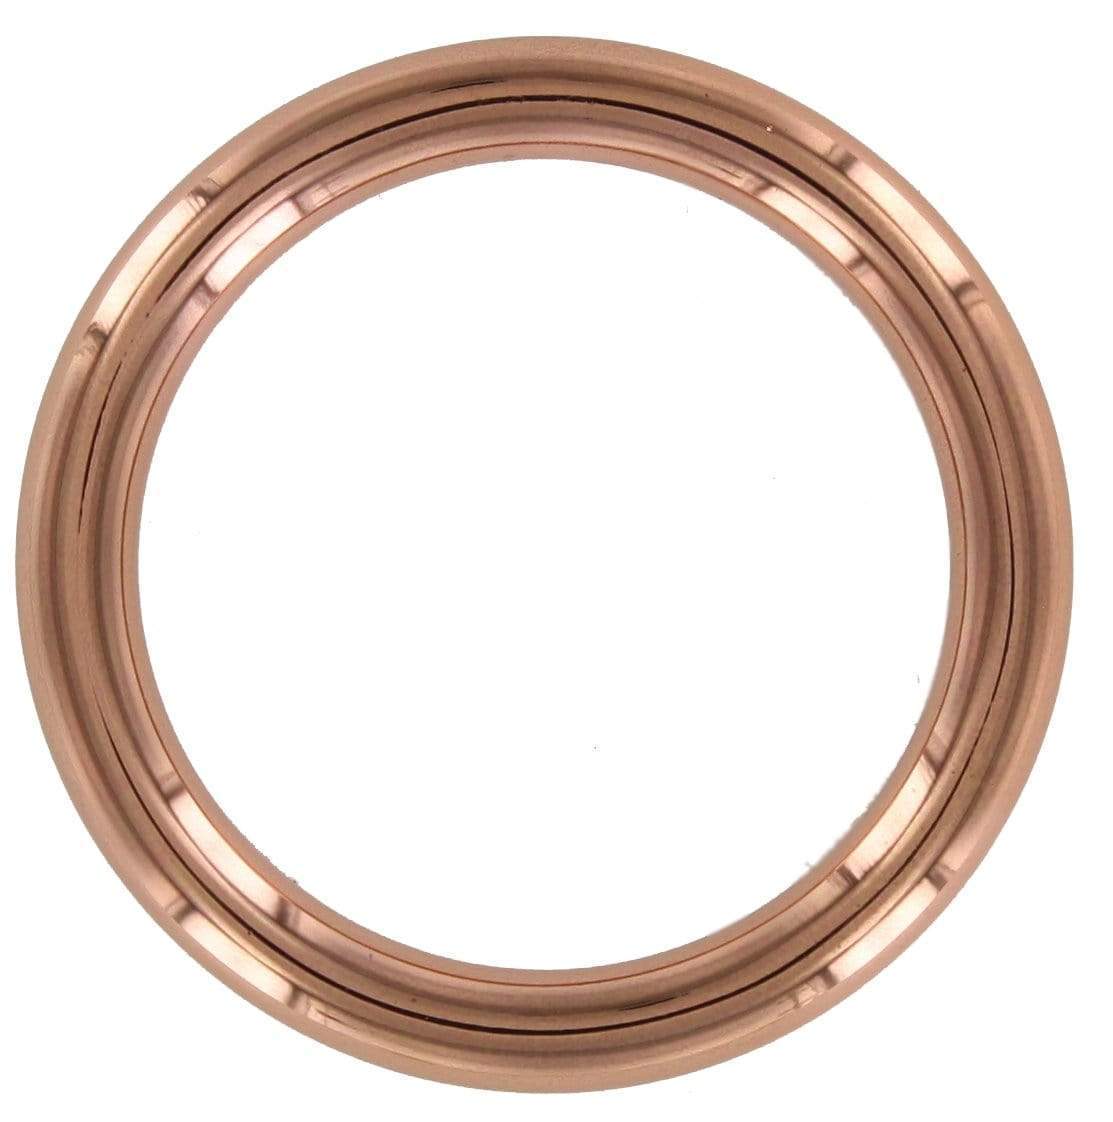 Ohio Travel Bag Rings & Slides 1 1/2" Copper, Cast Round Ring, Zinc Alloy, #P-2772-CPR P-2772-CPR